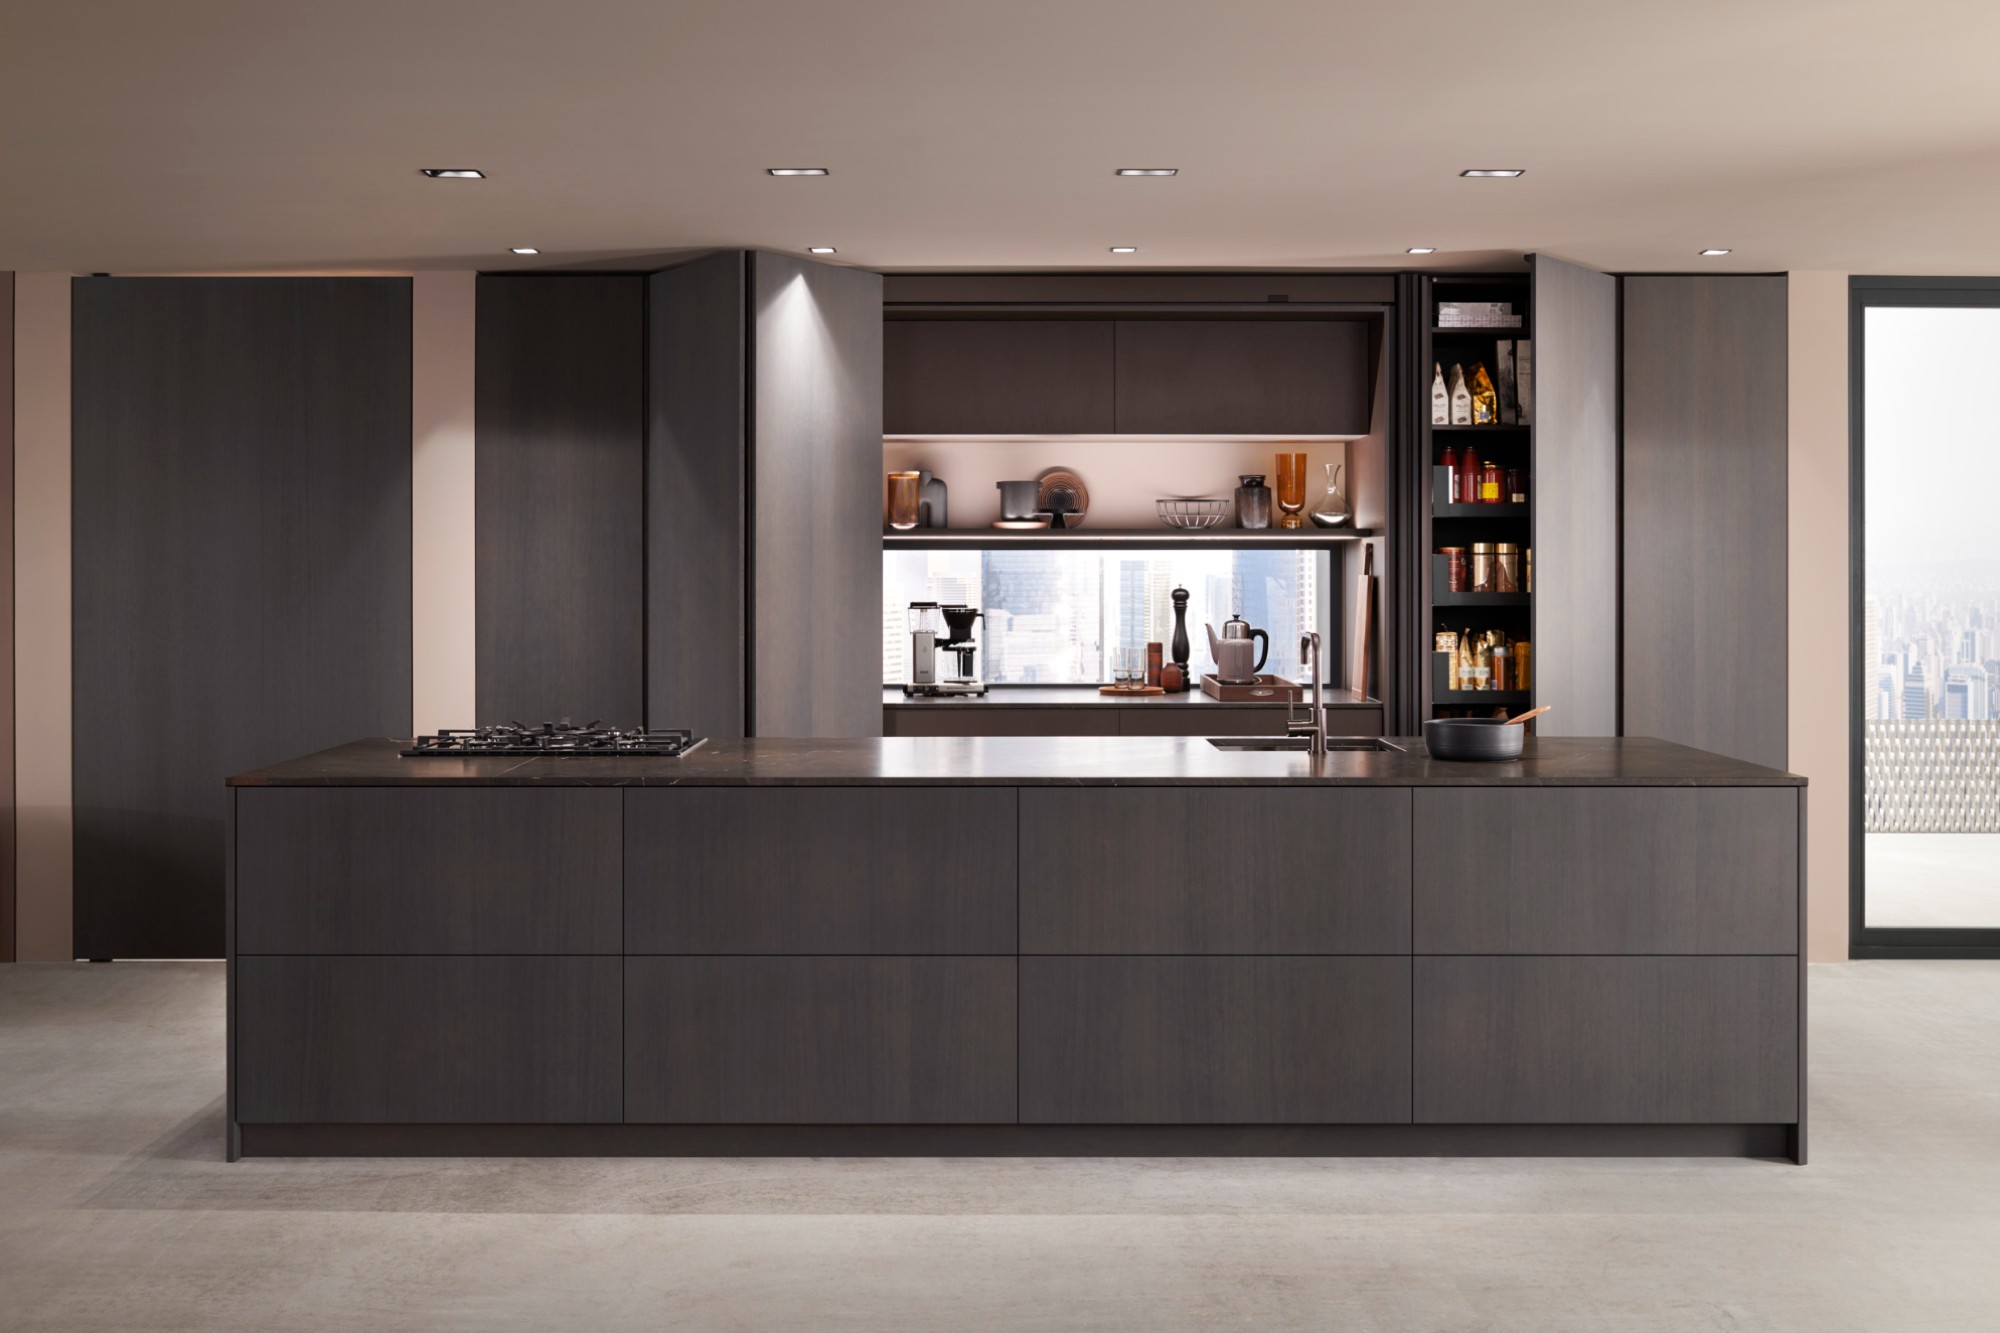 Blum REVEGO: The answer to adaptable space use